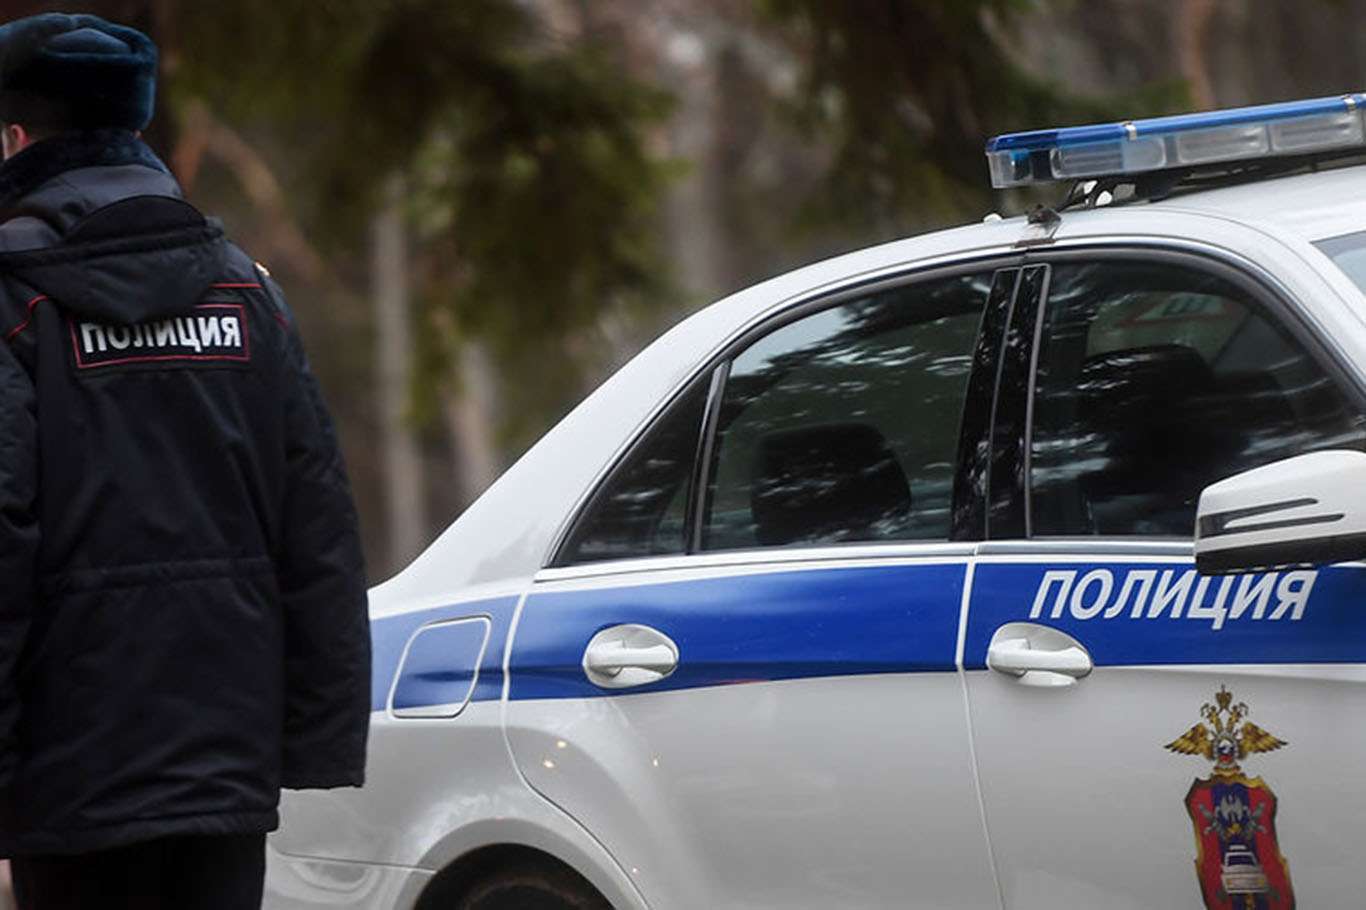 At least 8 students killed in Russia university shooting